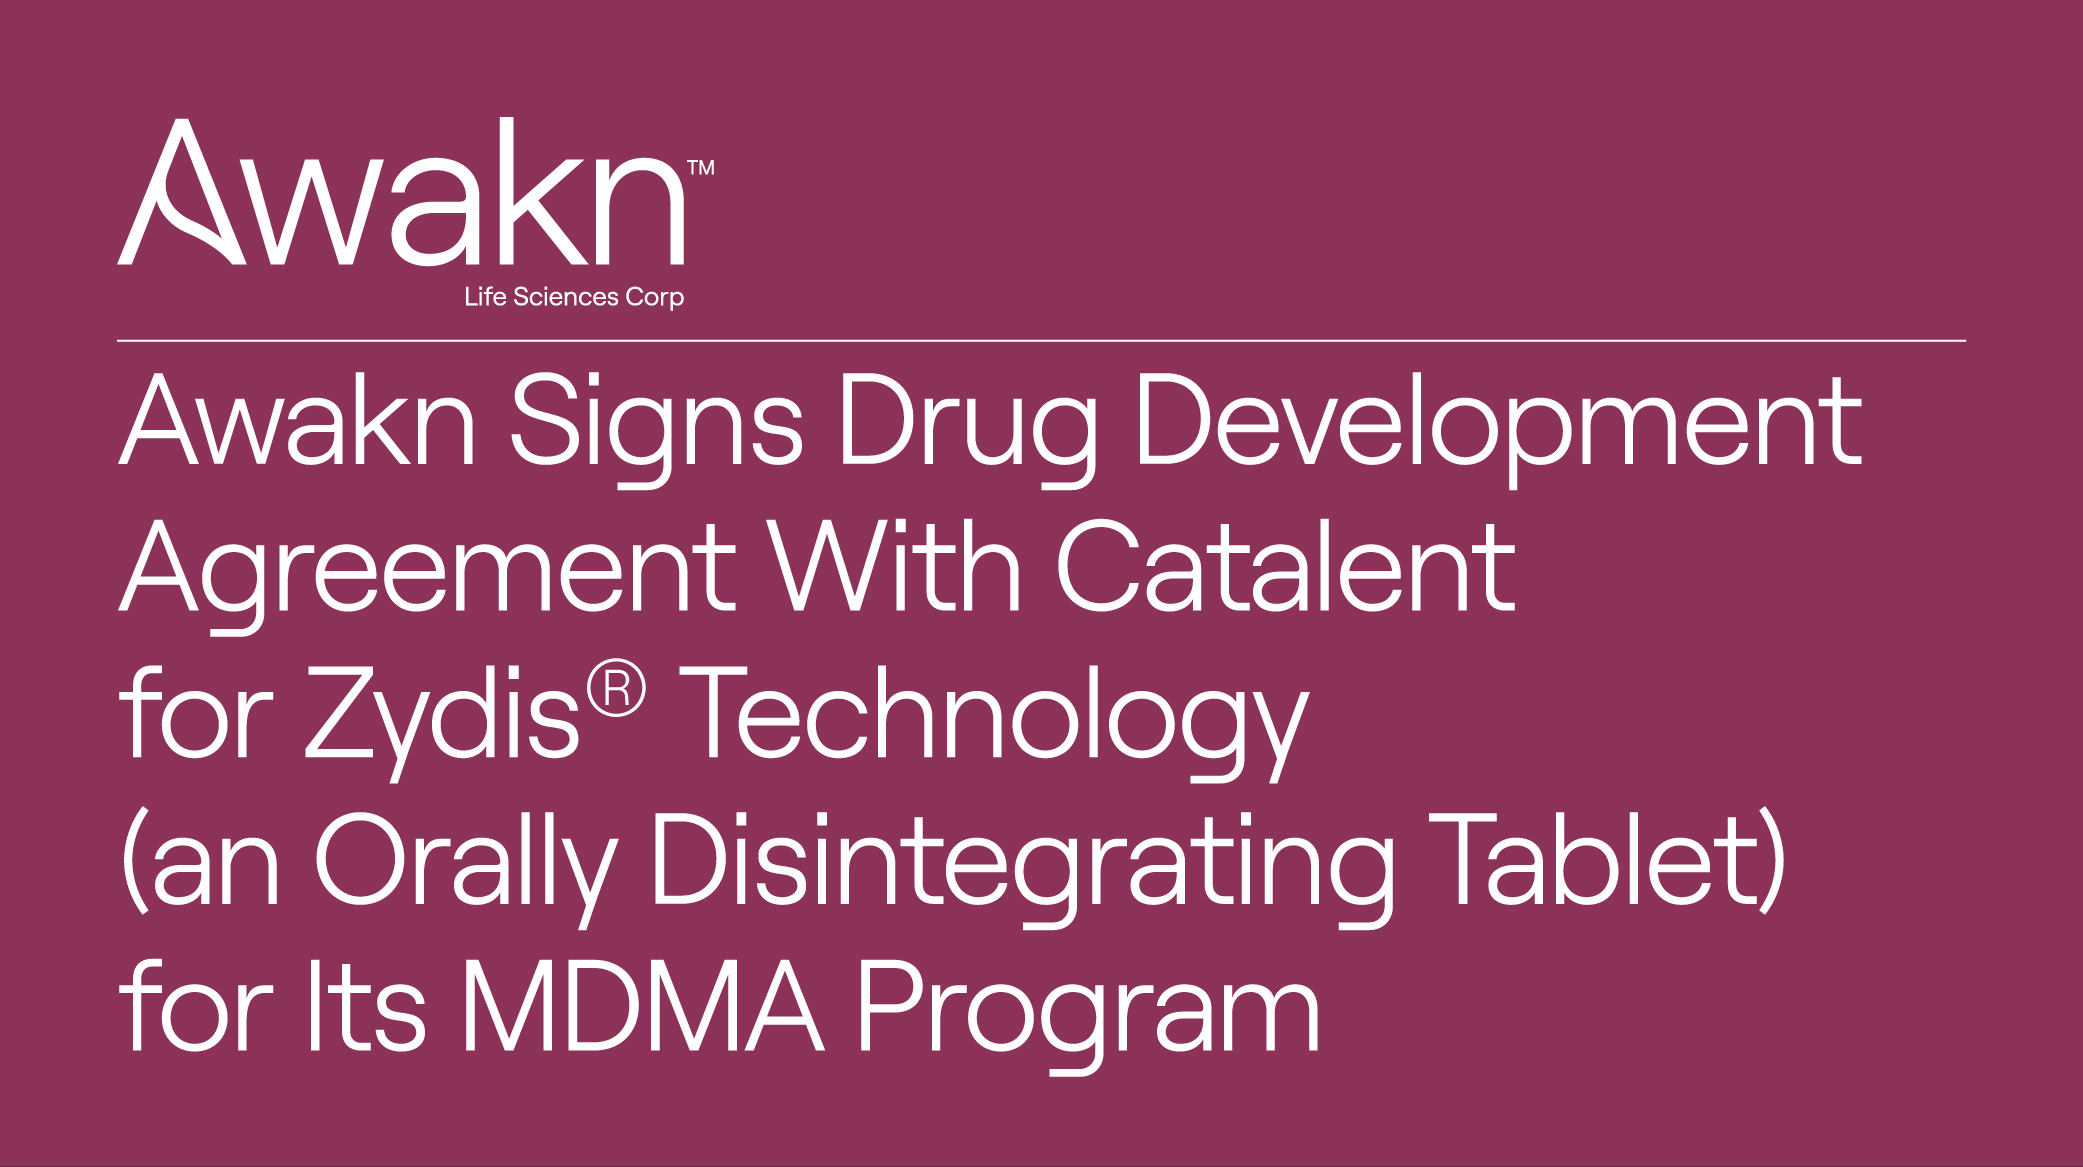 Awakn Life Sciences Signs Drug Development Agreement With Catalent For Zydis® Technology (An Orally Disintegrating Tablet) To Conduct Feasibility Studies To Improve Differentiation Of Its MDMA Program